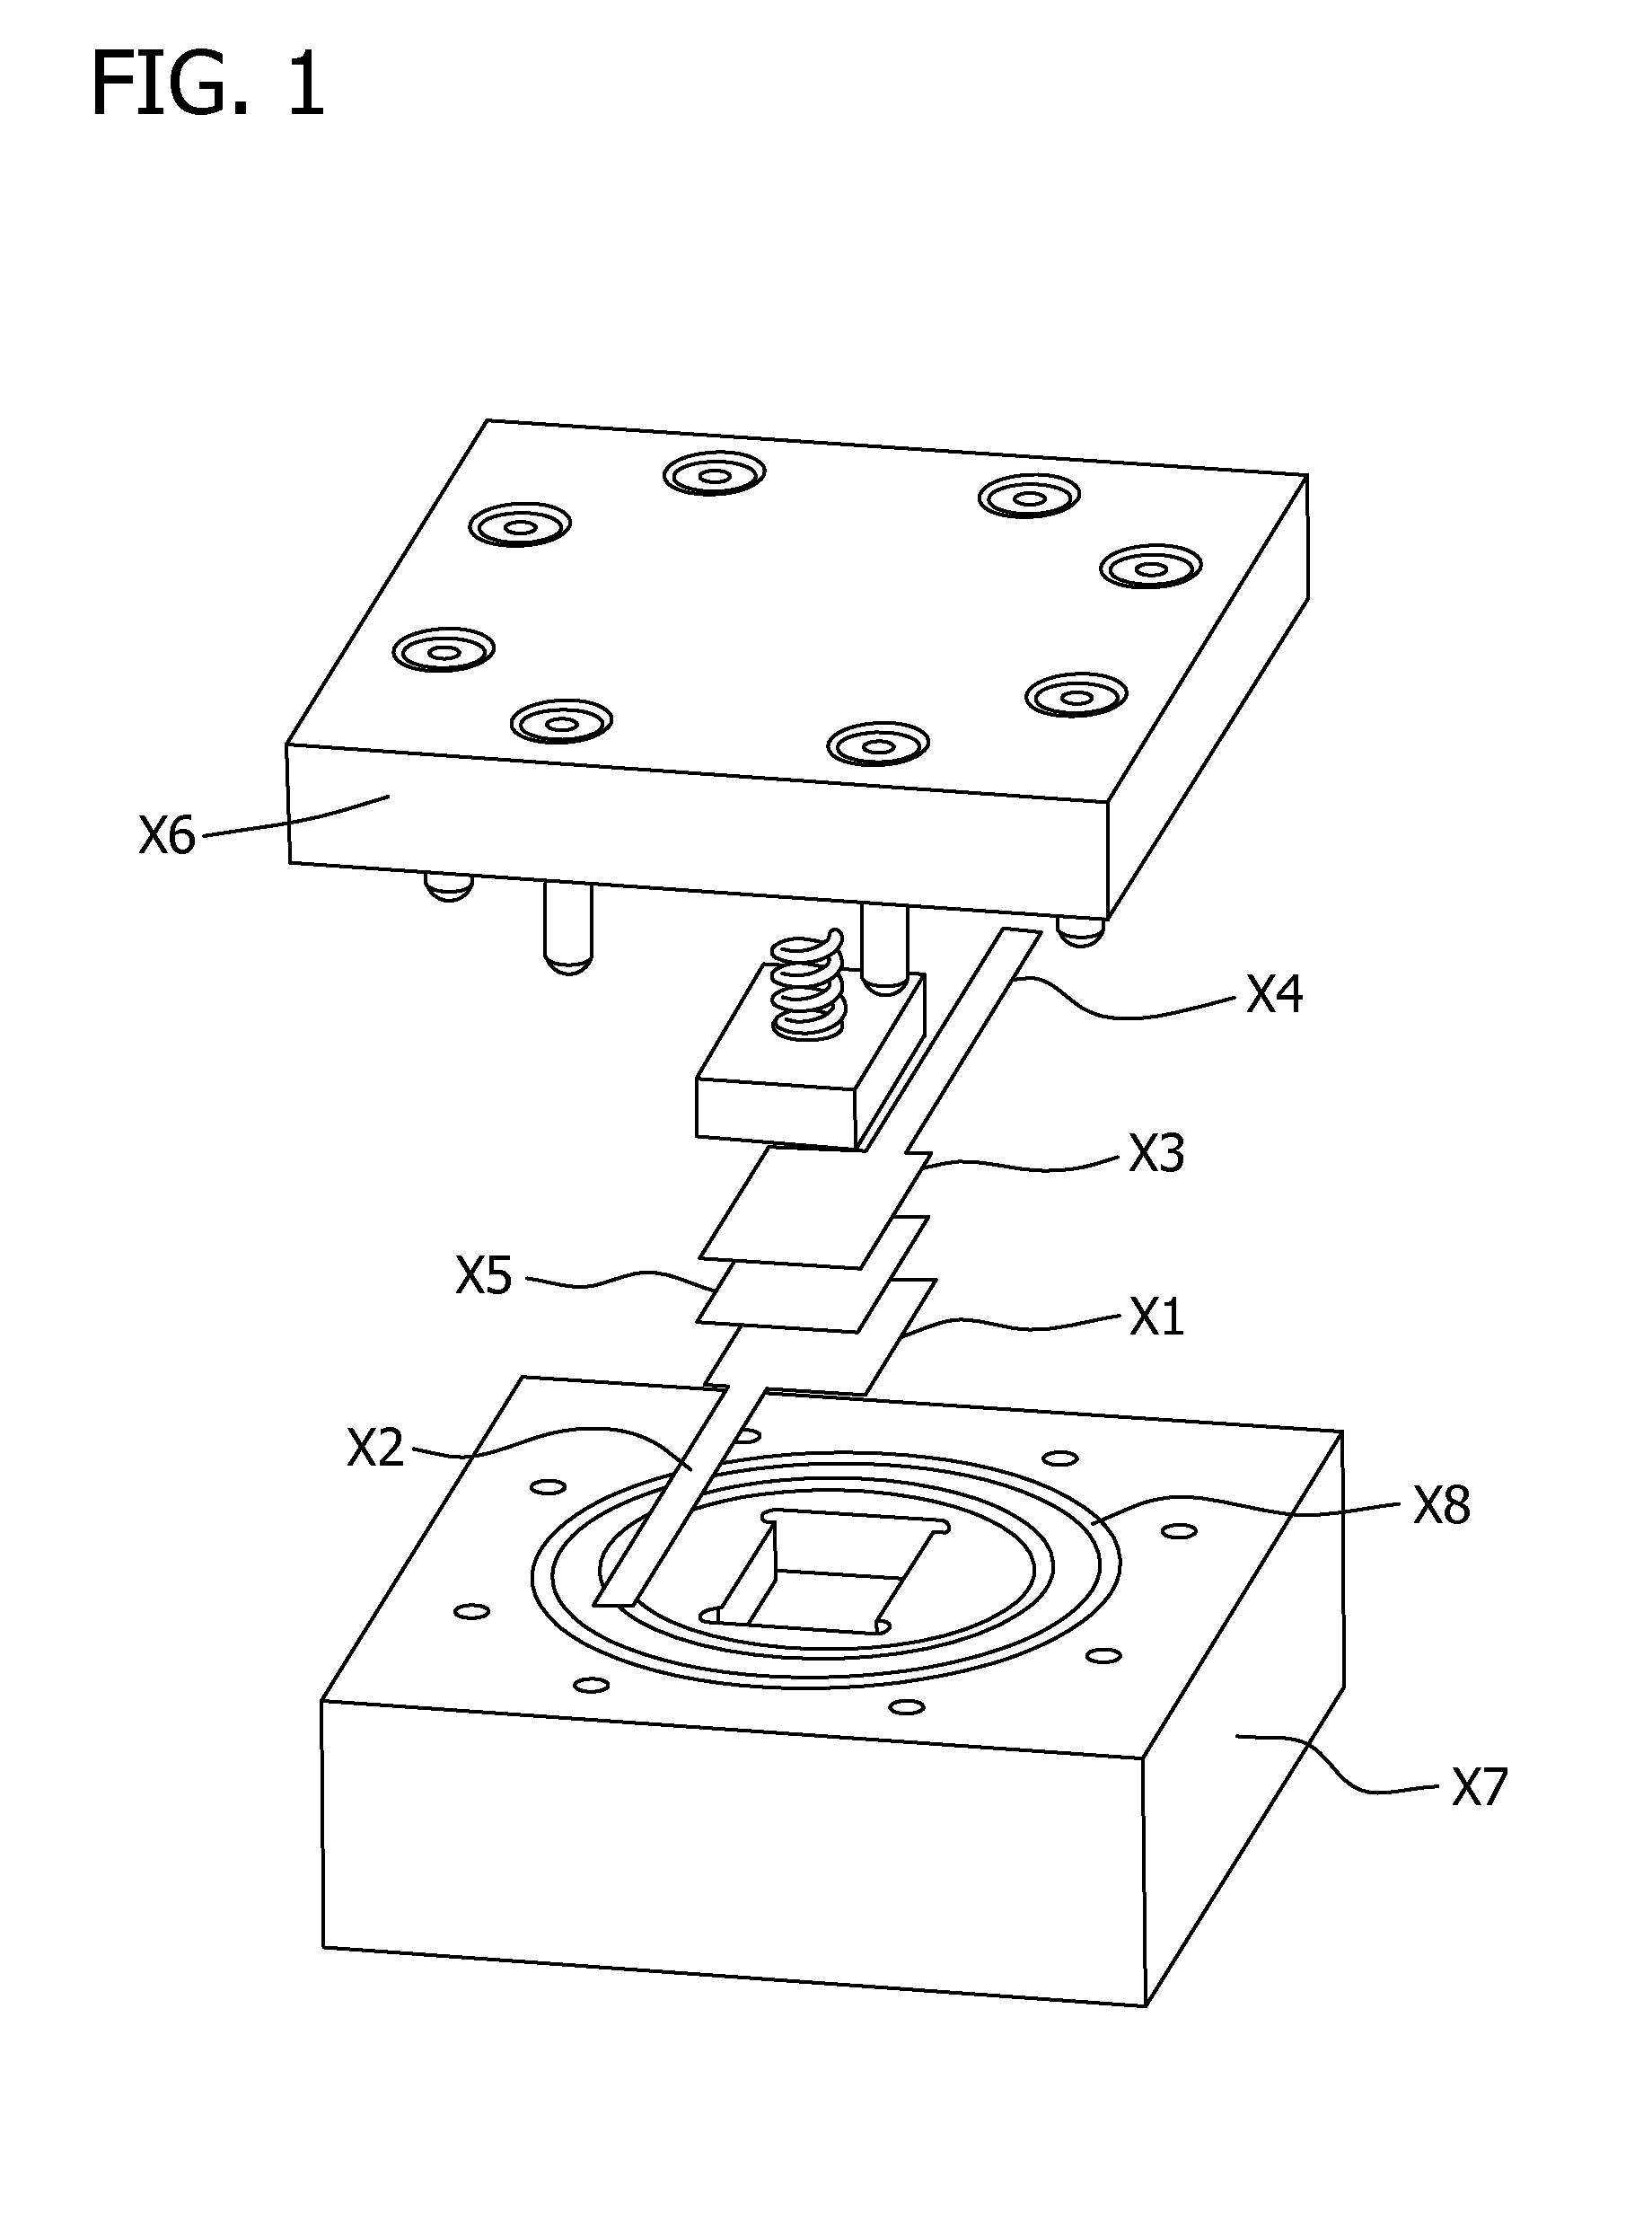 Non-aqueous cell having amorphous or semi-crystalline copper manganese oxide cathode material